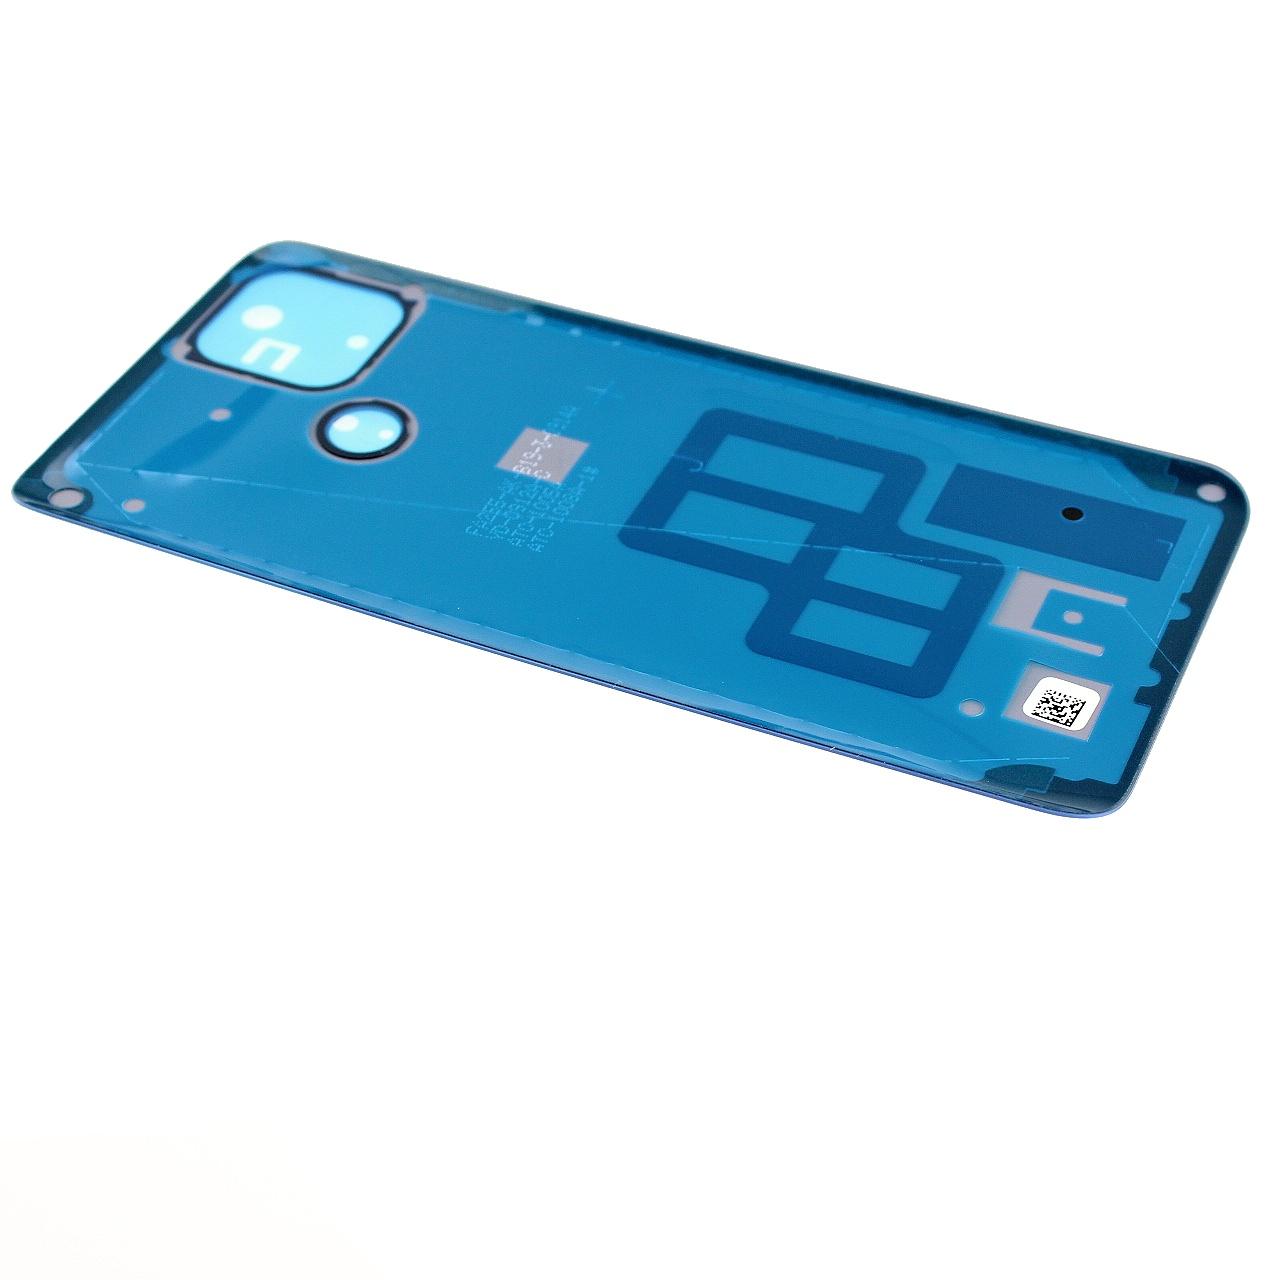 Original battery cover Oppo A15 / A15s blue (Mystery Blue)